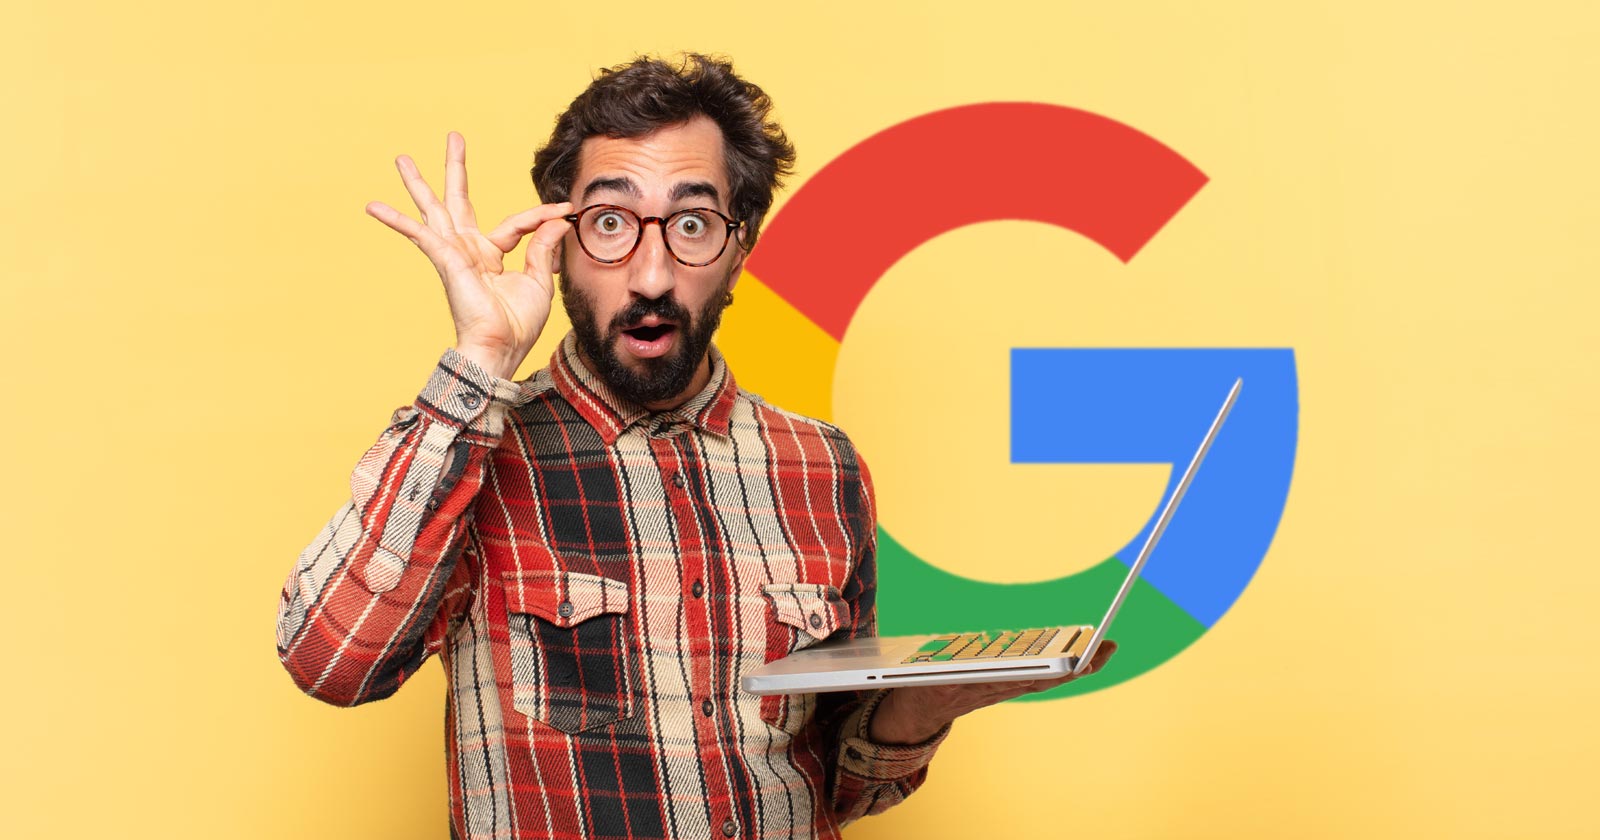 Reddit Post Ranks On Google In 5 Minutes – What’s Going On? via @sejournal, @martinibuster